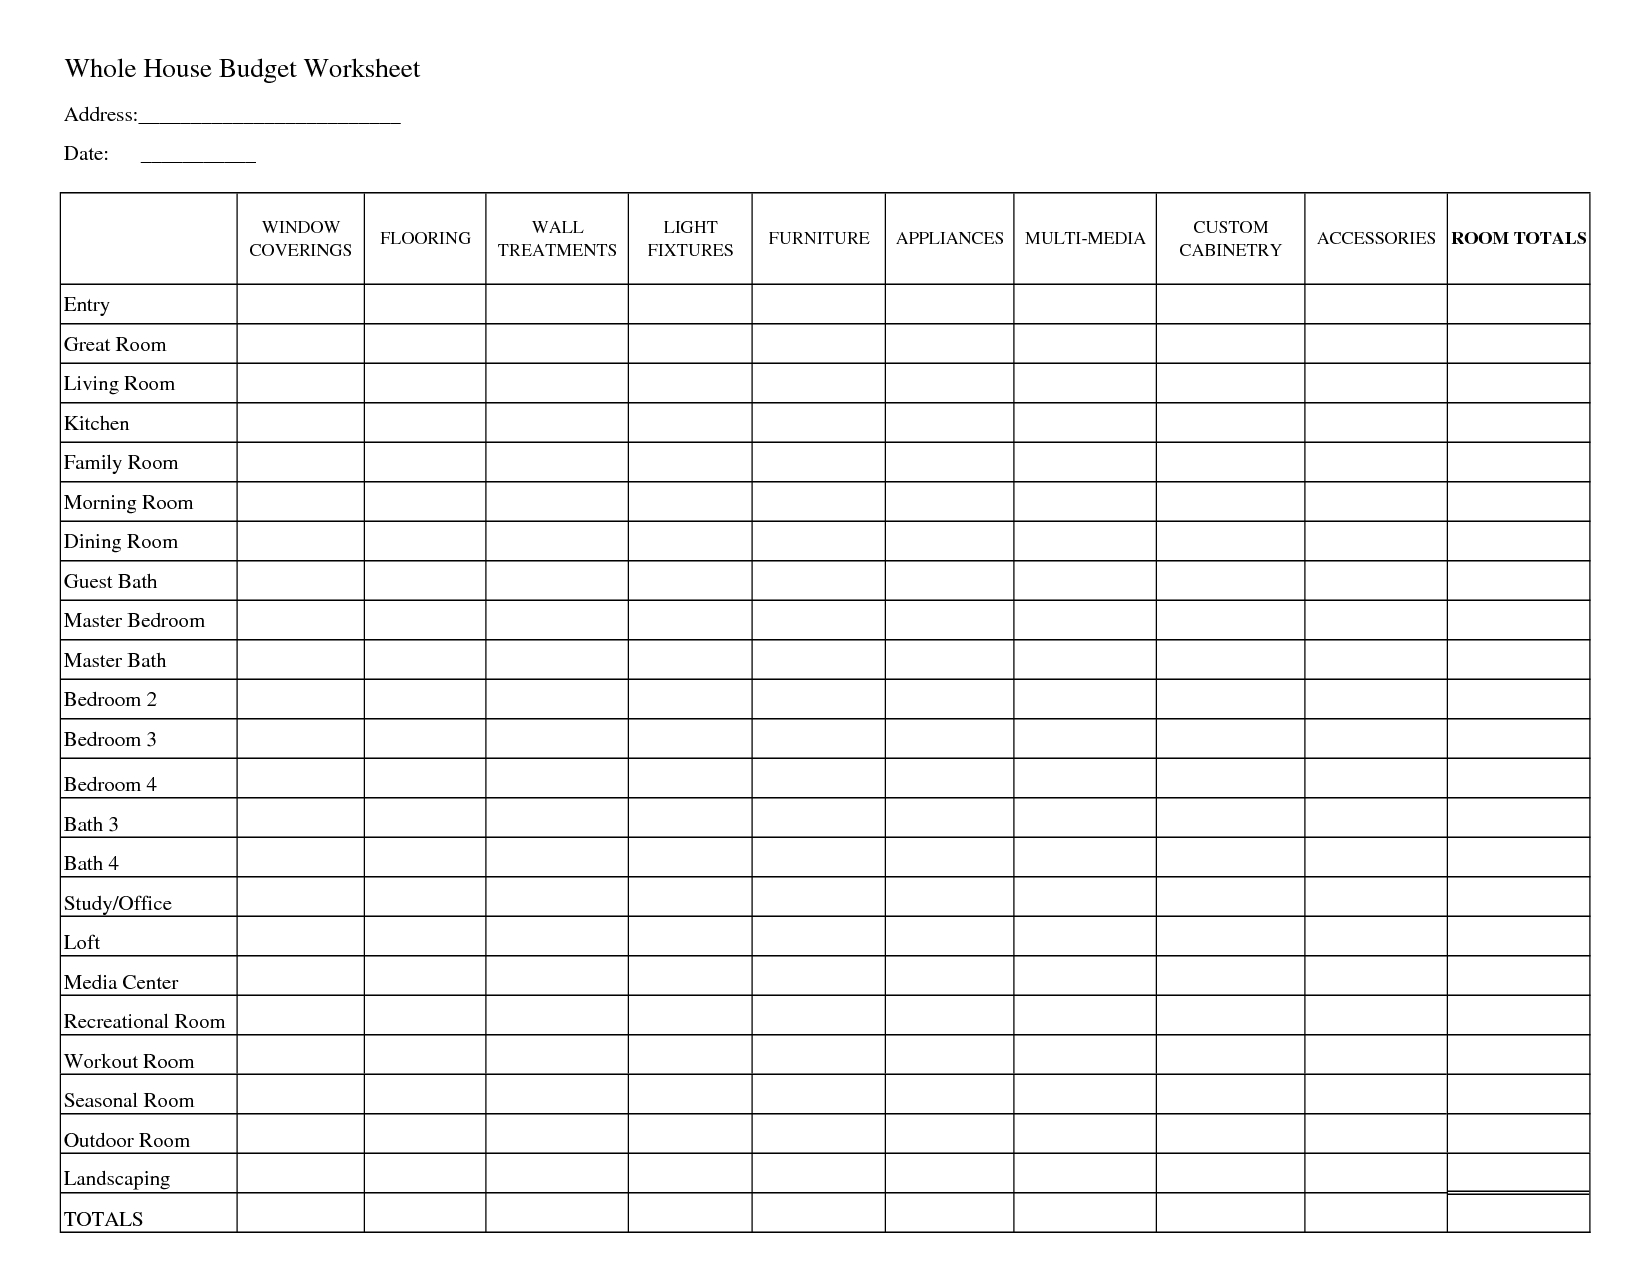 Printable Household Budget Worksheets | Whole House Budget Worksheet - Free Printable Family Budget